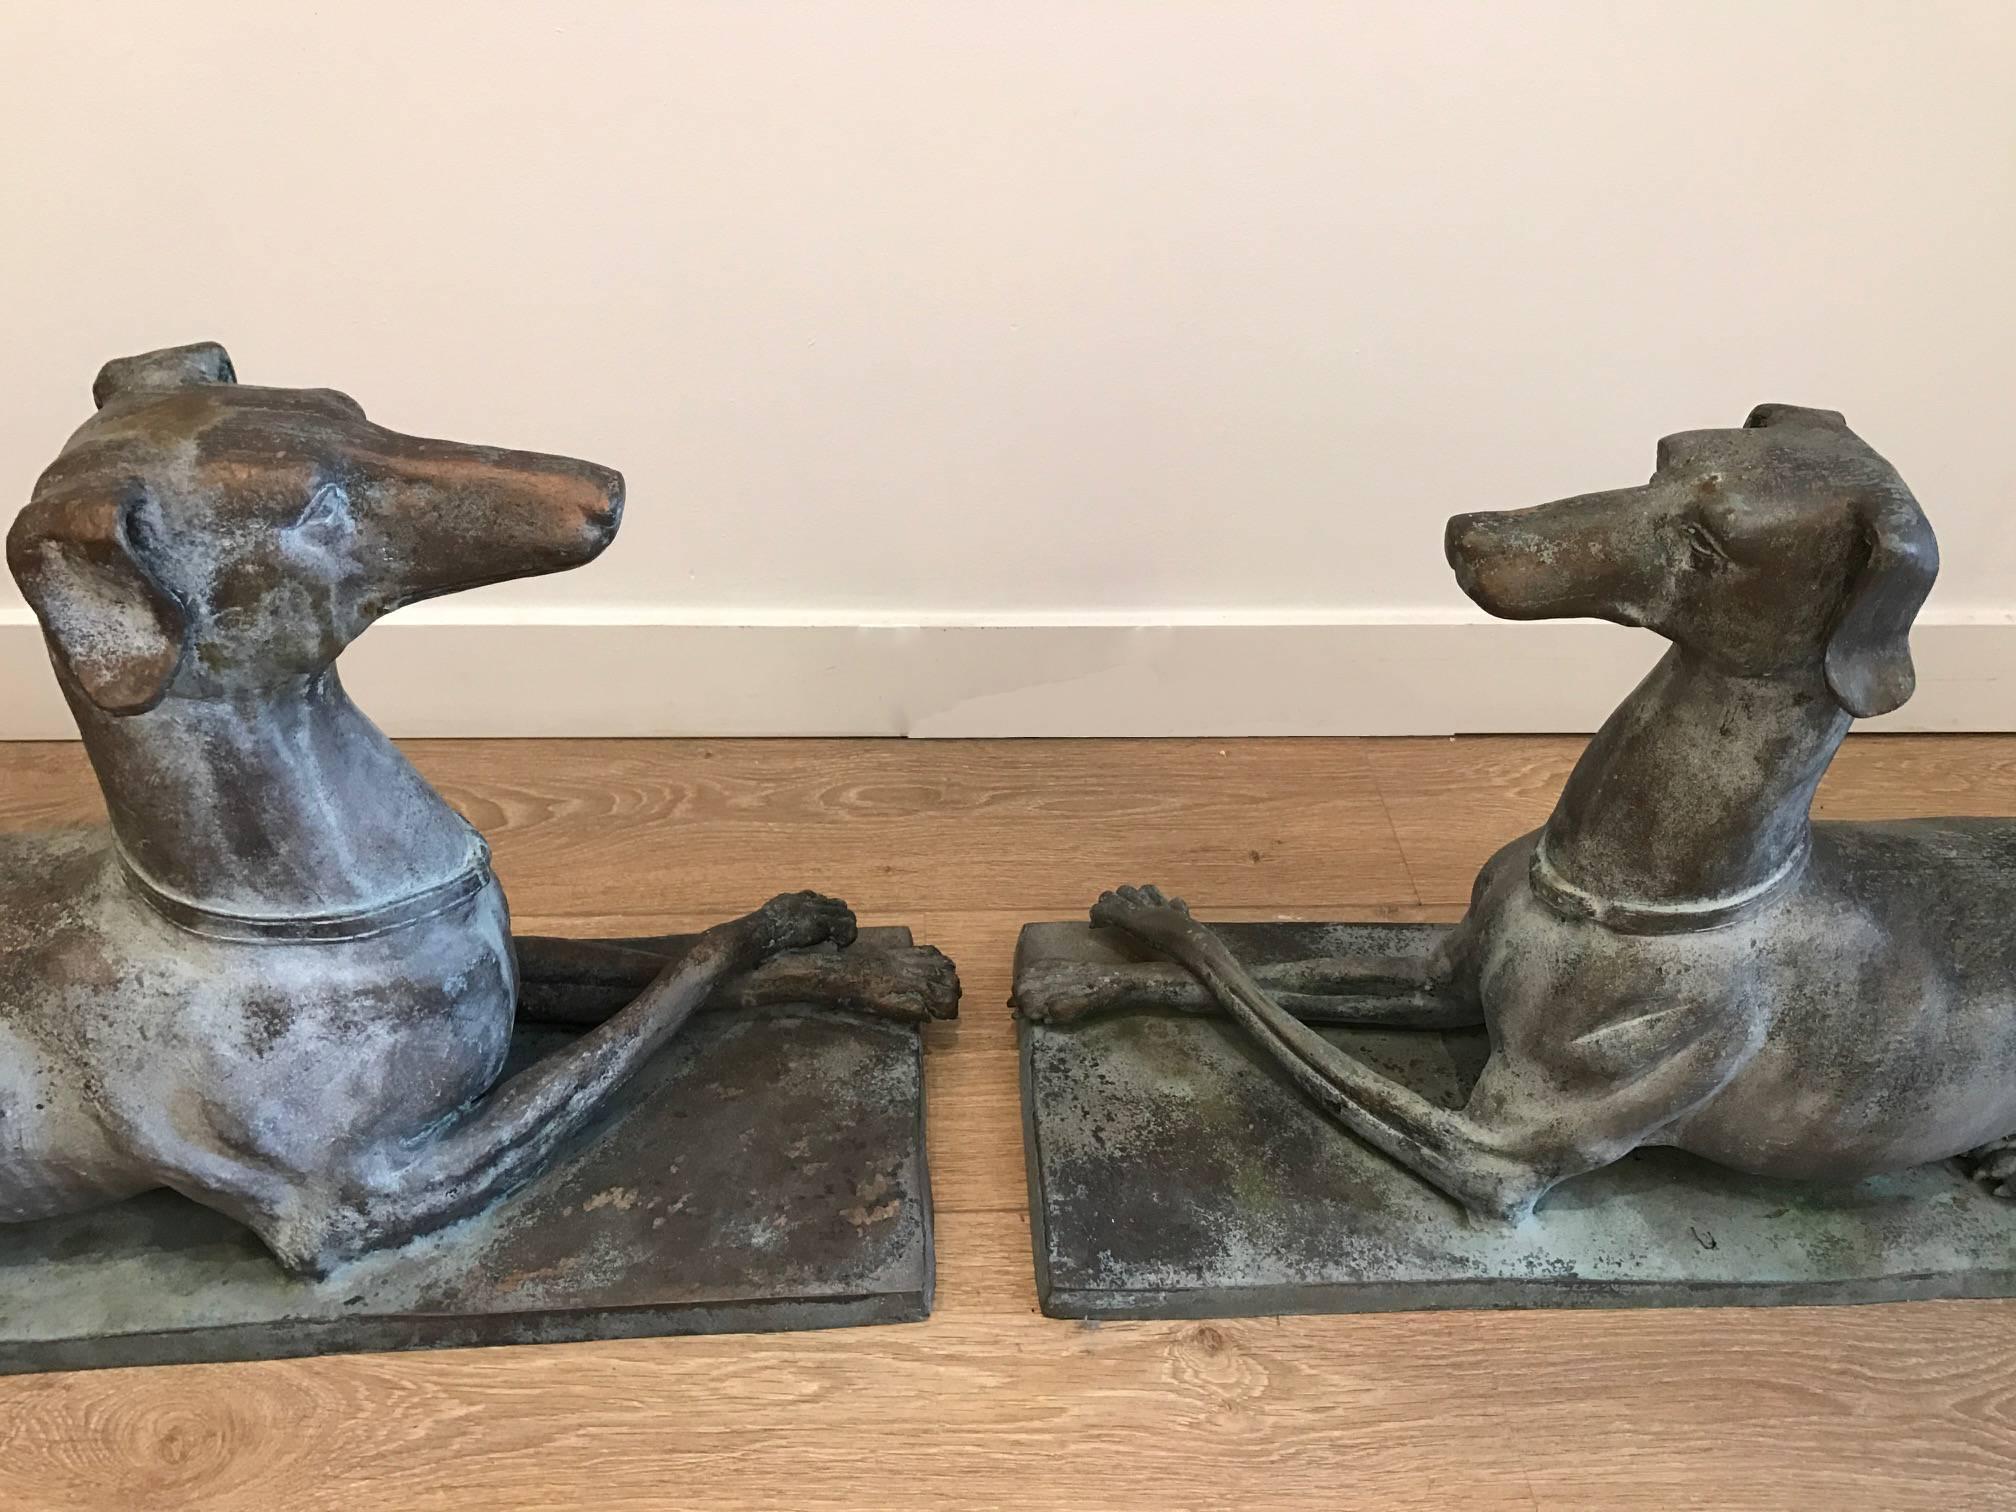 Pair of early 20th century bronze whippets garden sculptures, original verdigris patina. Wear consistent with exposure to the outdoor elements.
Provenance available.

For additional questions regarding this item, please click the 